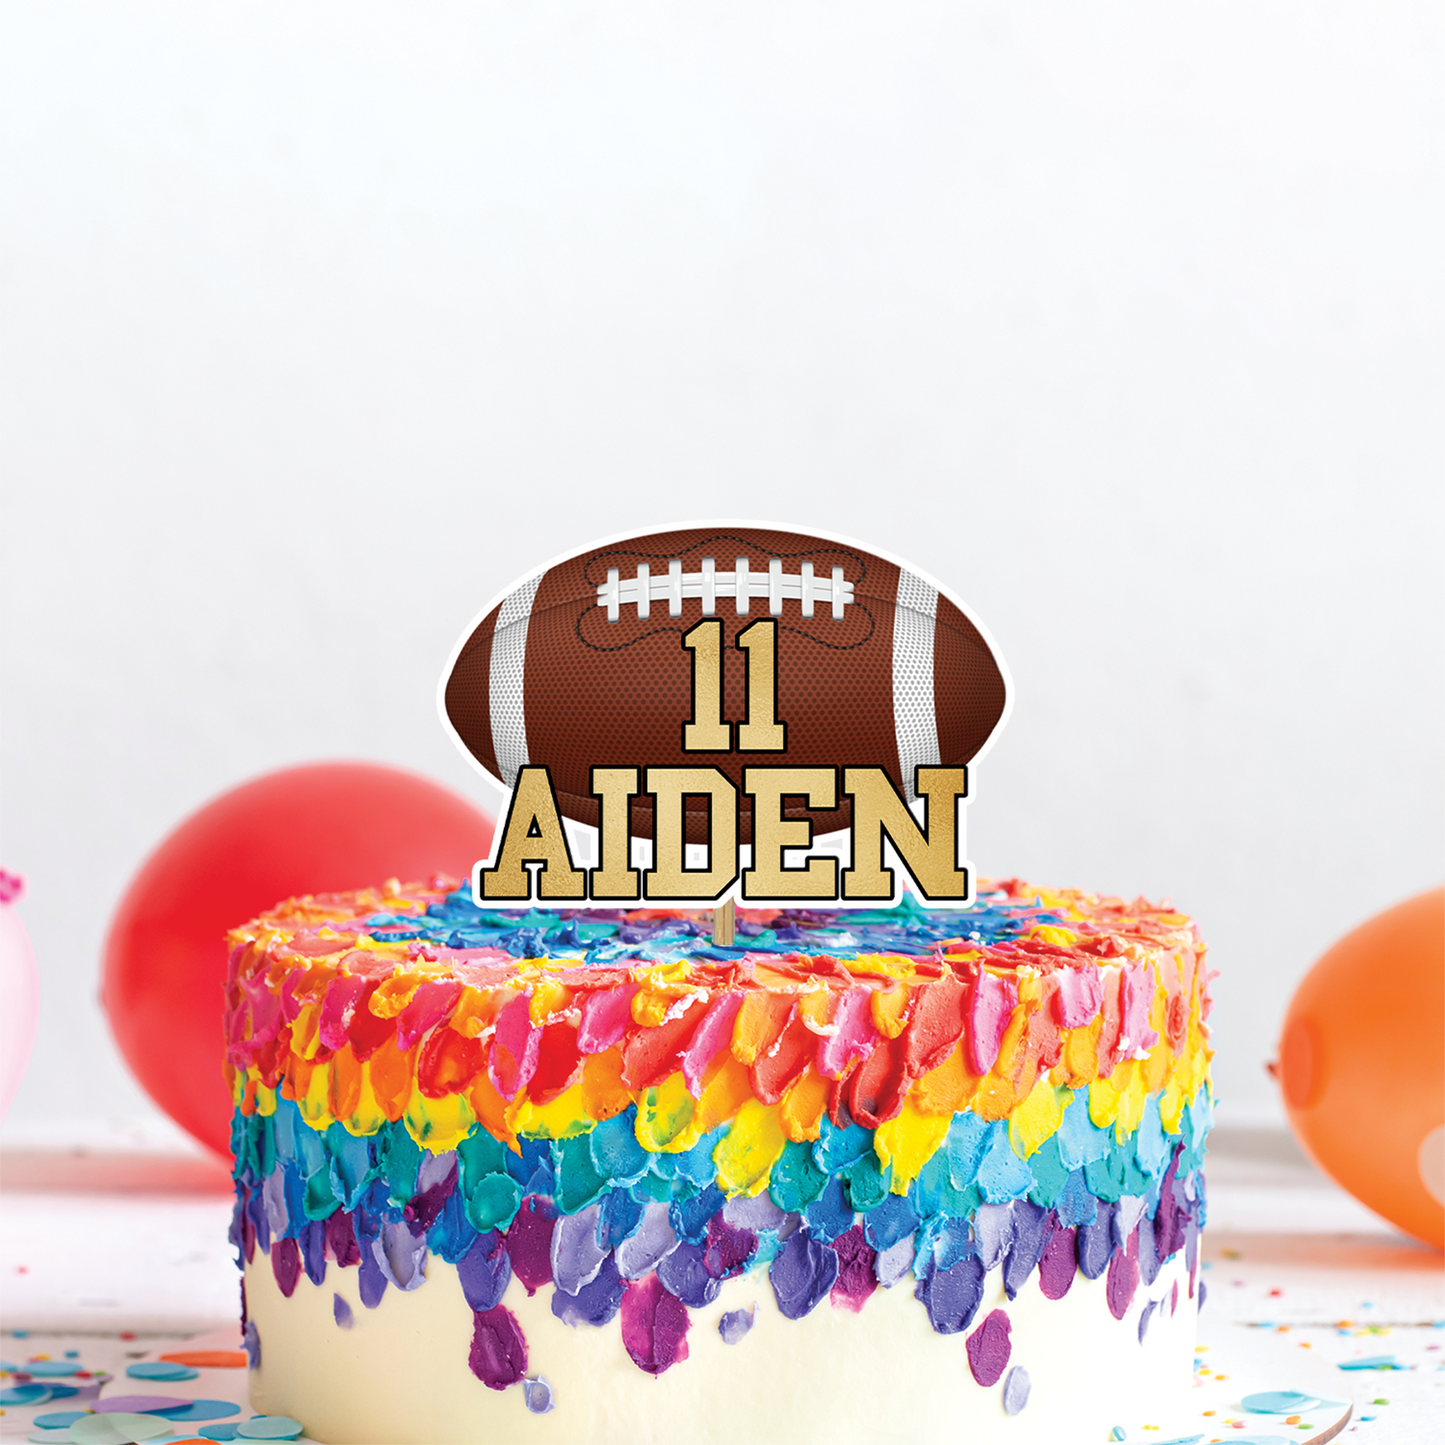 Personalized cake toppers with a Football theme